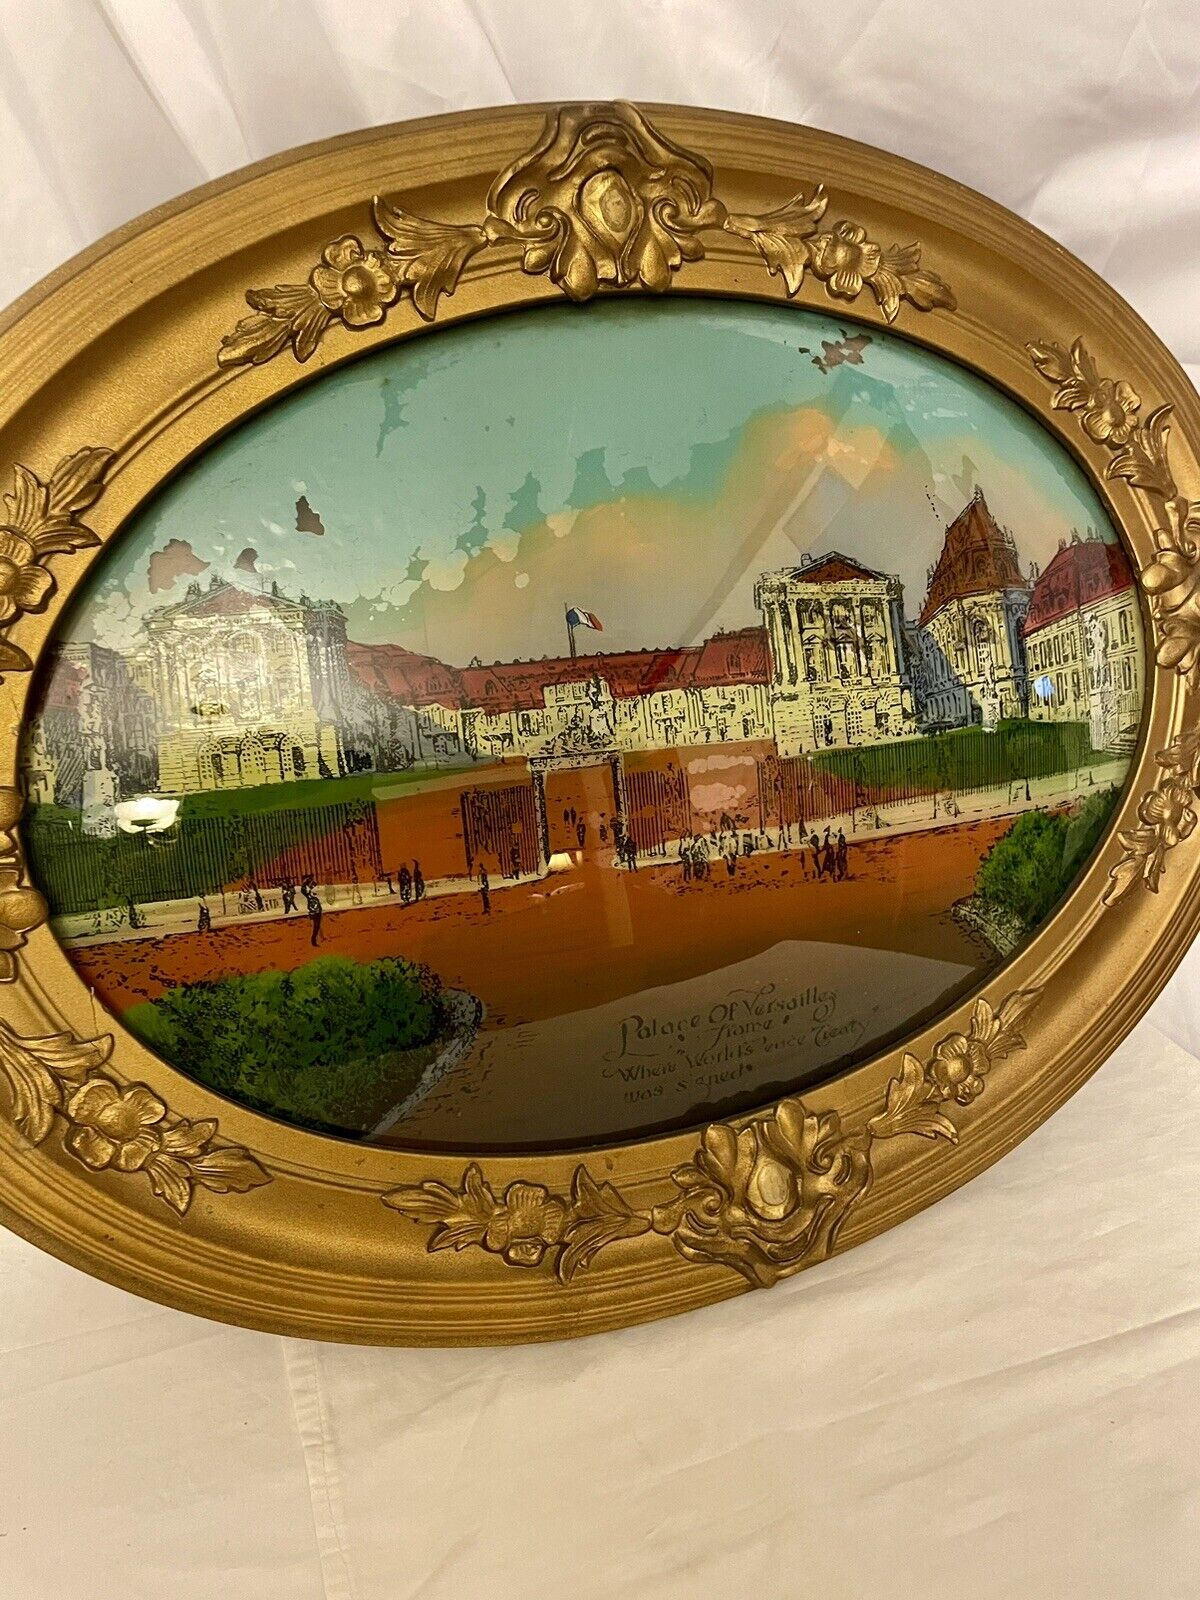 1918 Armistice Day Pease Treaty of Versailles WWI Reverse Painting on Glass